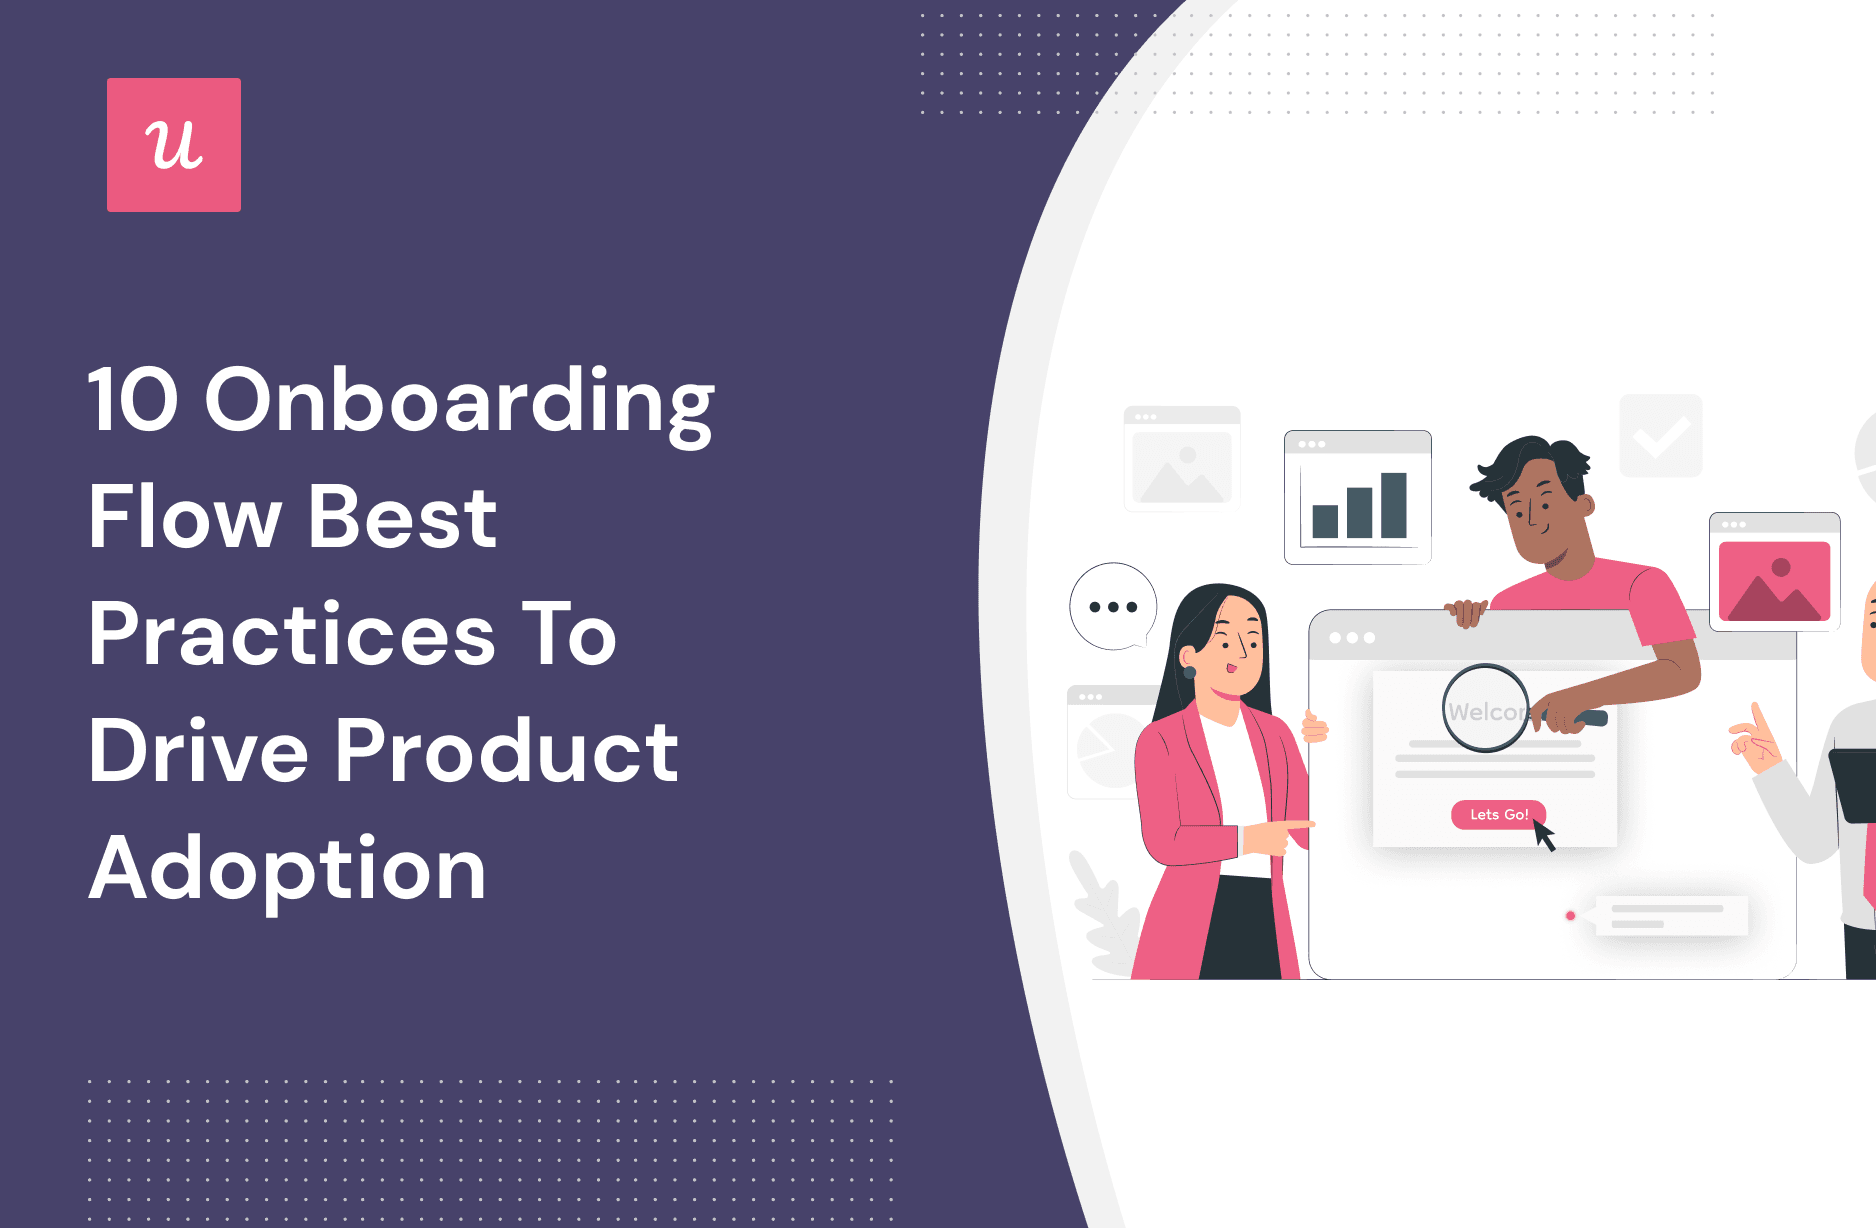 10 Onboarding Flow Best Practices to Drive Product Adoption cover